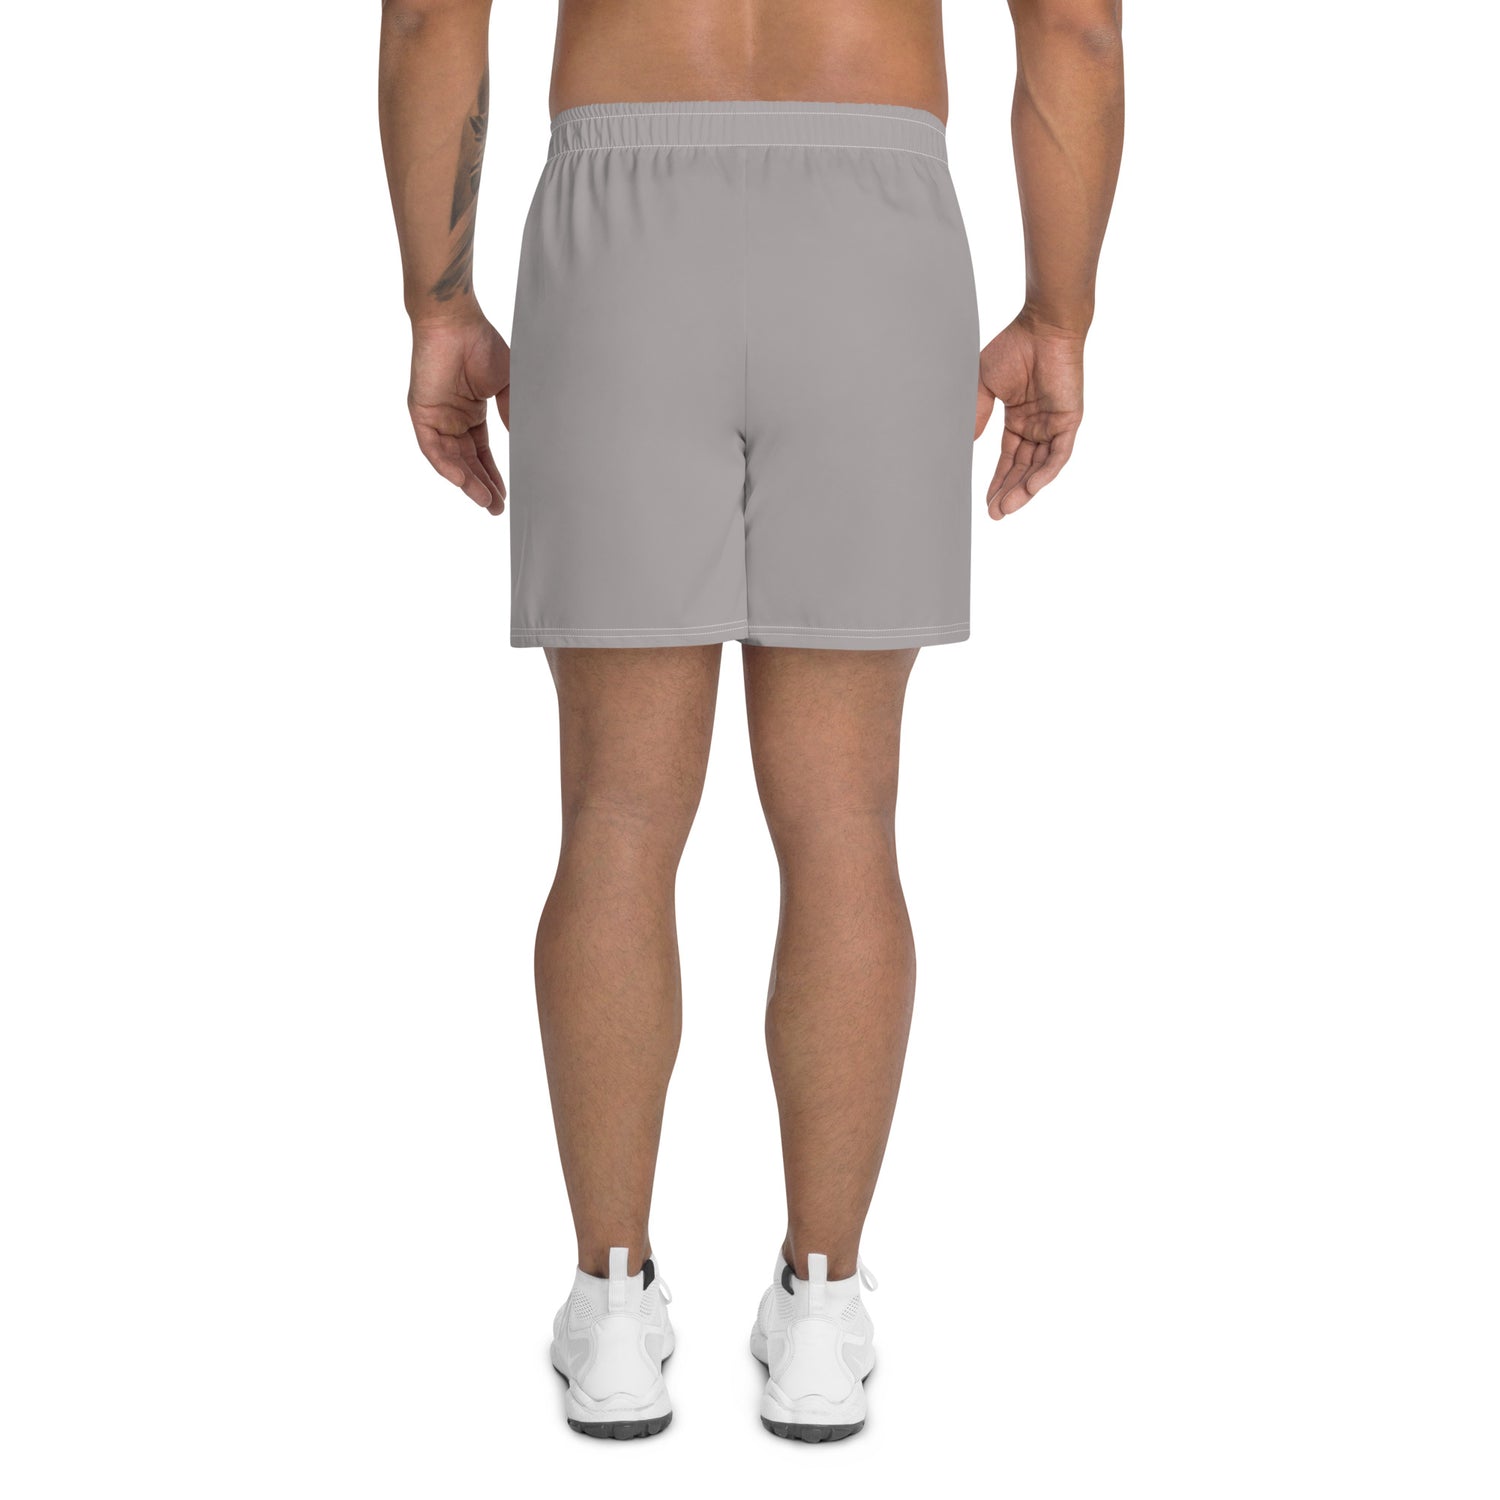 Back facing view of the gray Champletes Light Speed shorts.